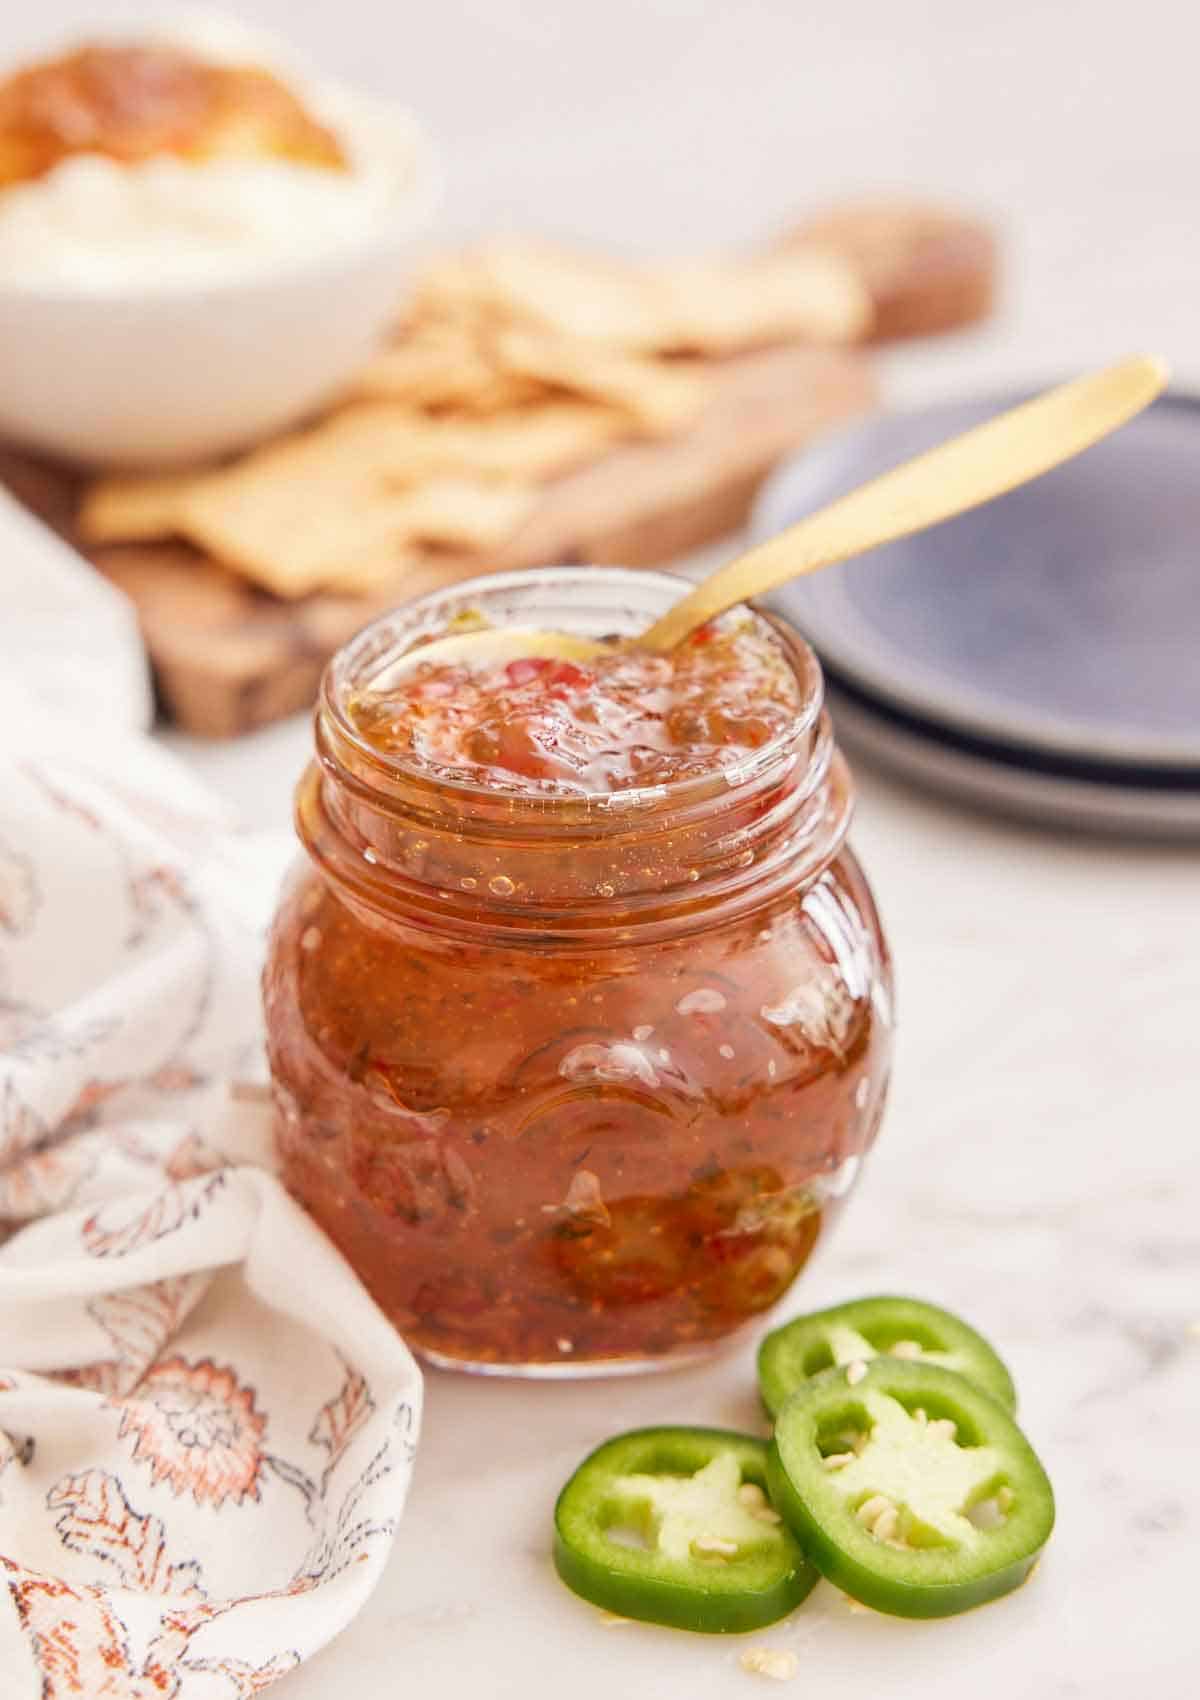 A mason jar of jalapeno jelly with a spoon inside and some sliced jalapeno in front.